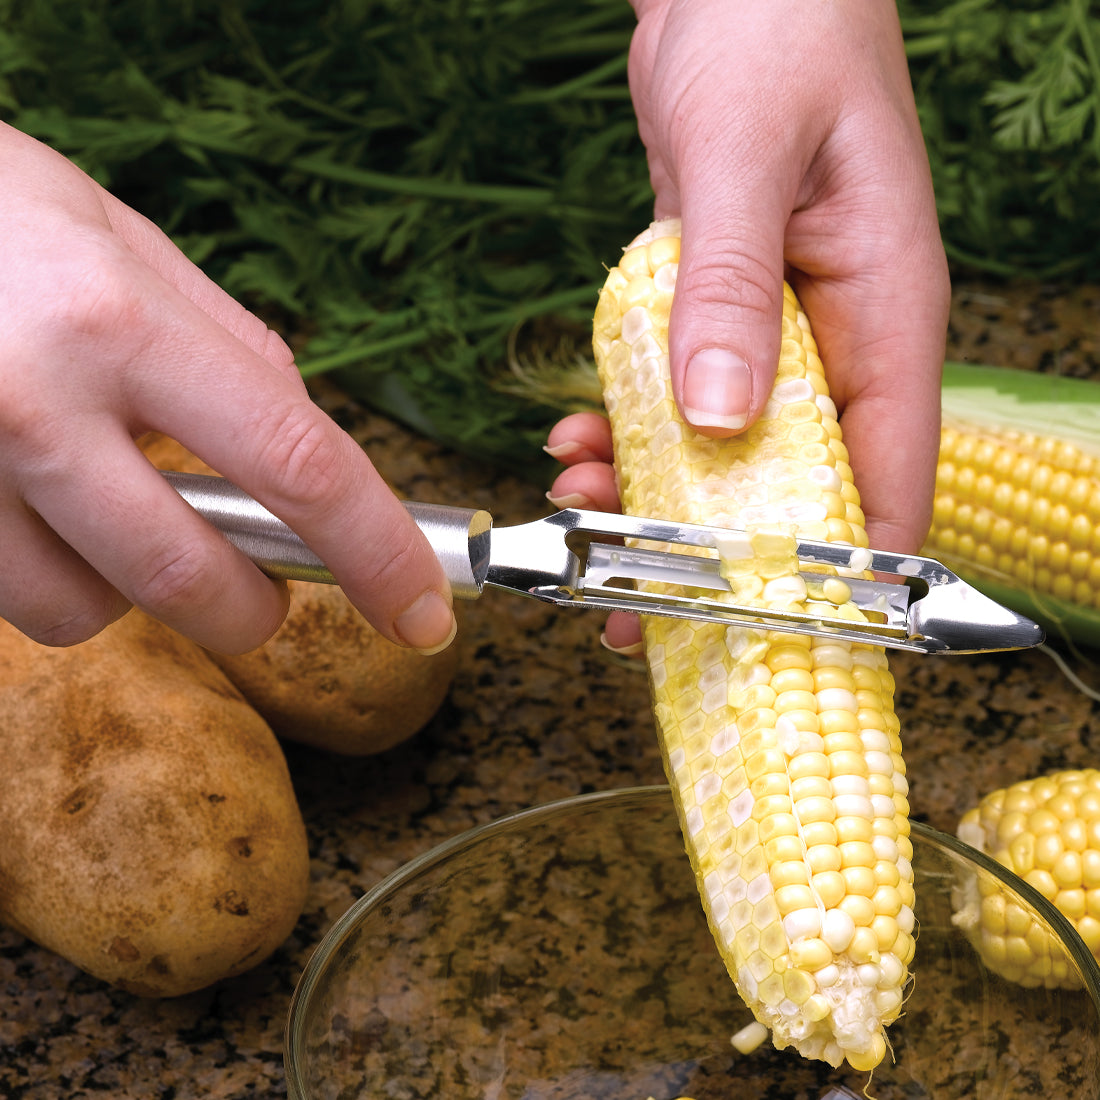 The Absolute Best Uses For Your Vegetable Peeler